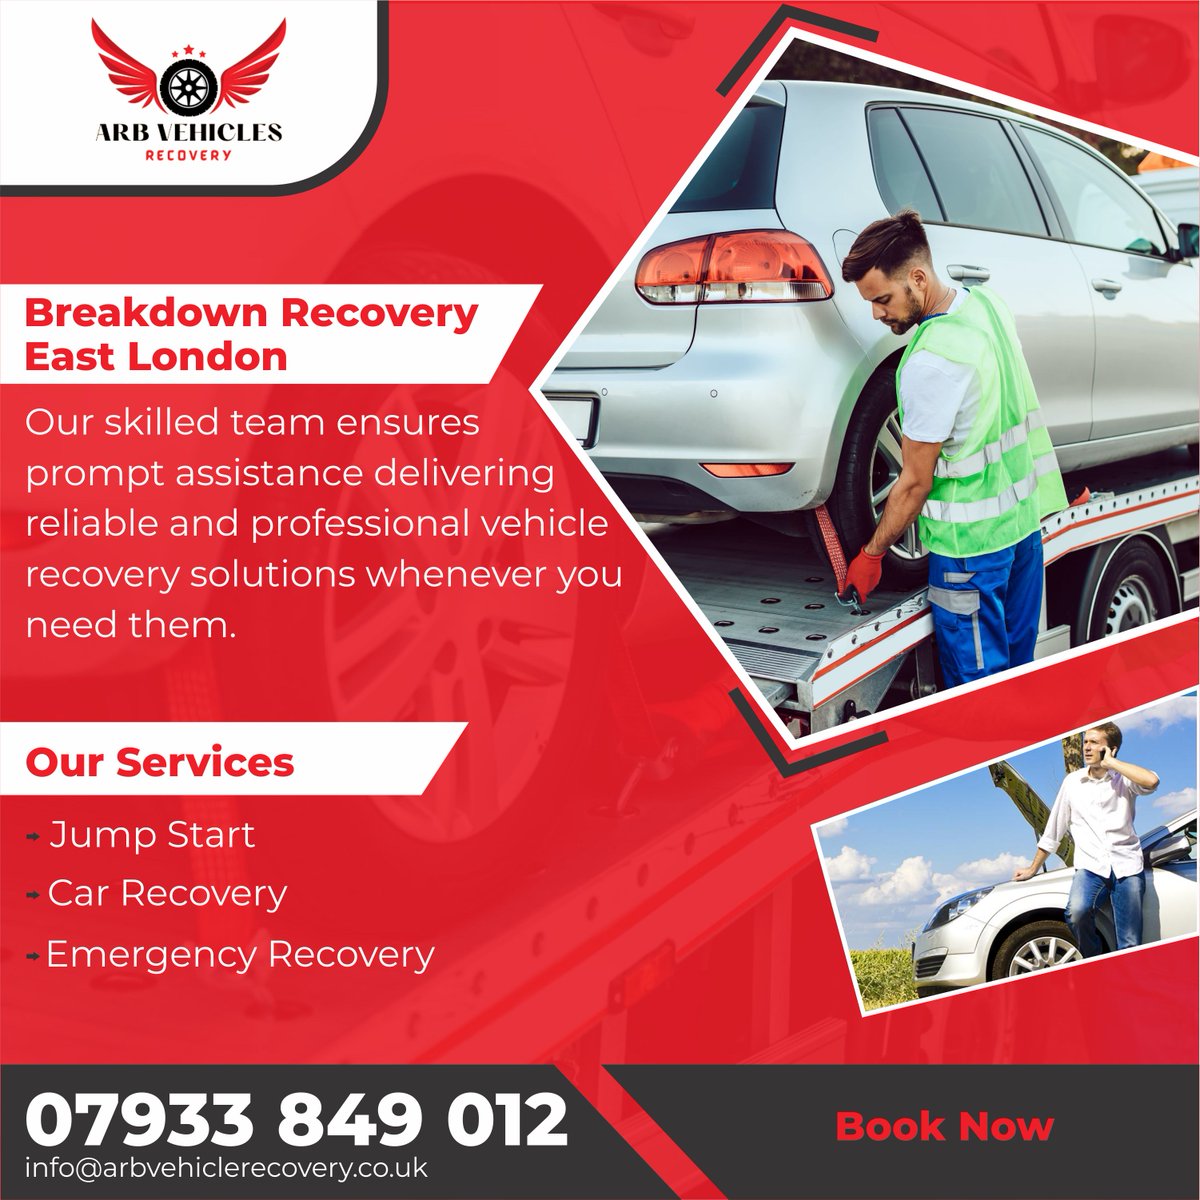 ARB Vehicle Recovery delivers swift and reliable breakdown recovery services in East London. Trust us for expert assistance on Caistor Park Road and beyond.

arbvehiclerecovery.co.uk
#ARBRecoveryLondon
#EastLondonBreakdown
#CaistorParkRoadRescue
#EmergencyRecovery
#EastLDNRecovery